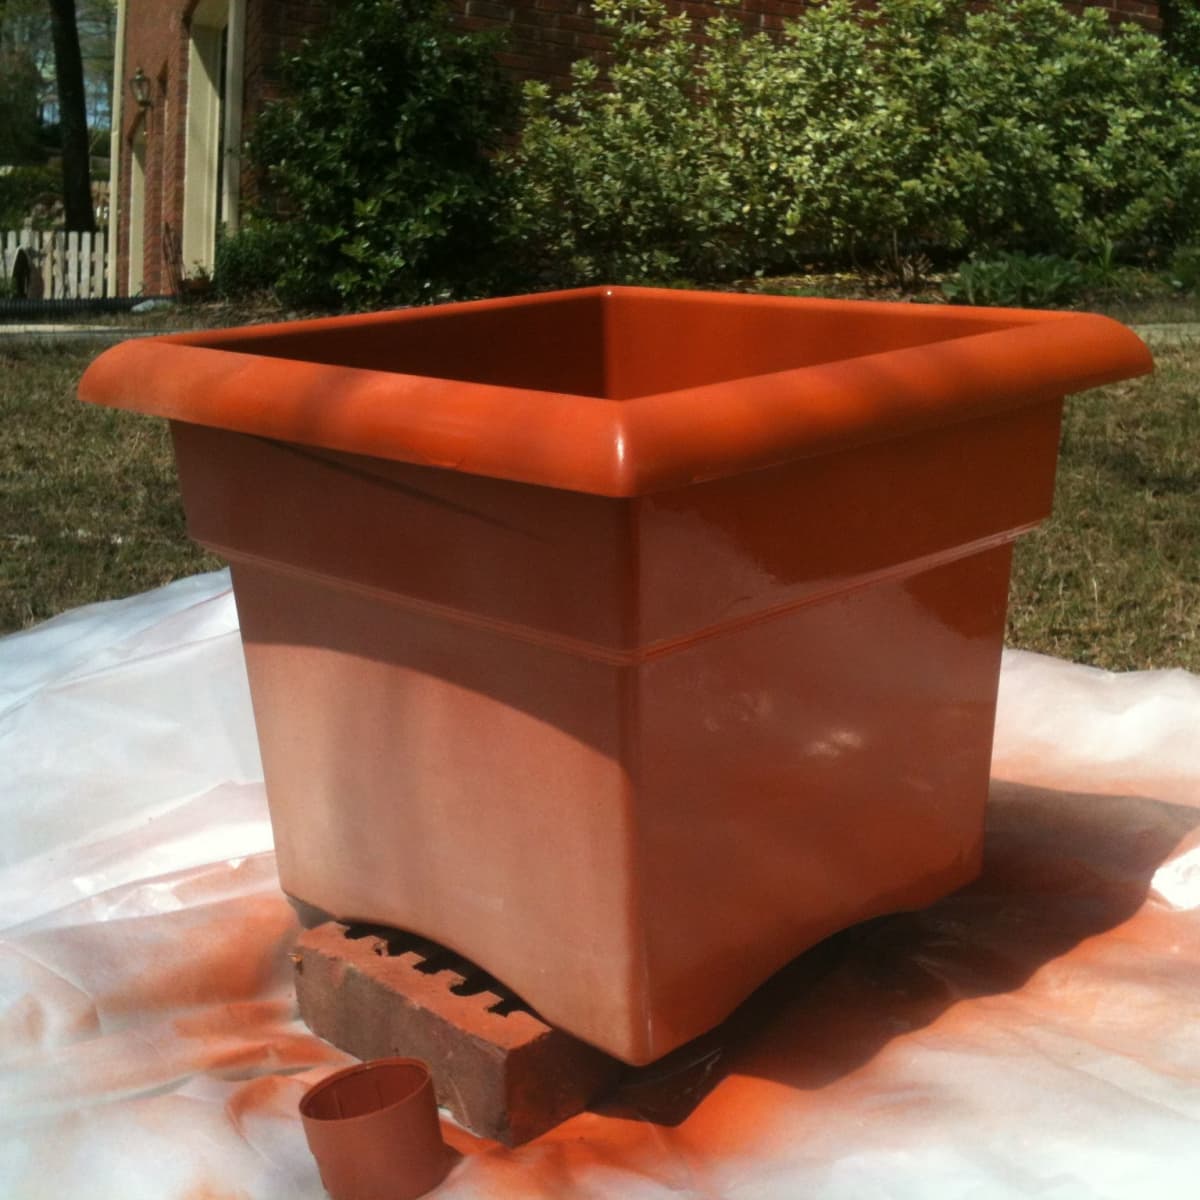 PAINT REMOVER. STRIP SOIL HOW TO REMOVE PAINT FROM PLASTIC 